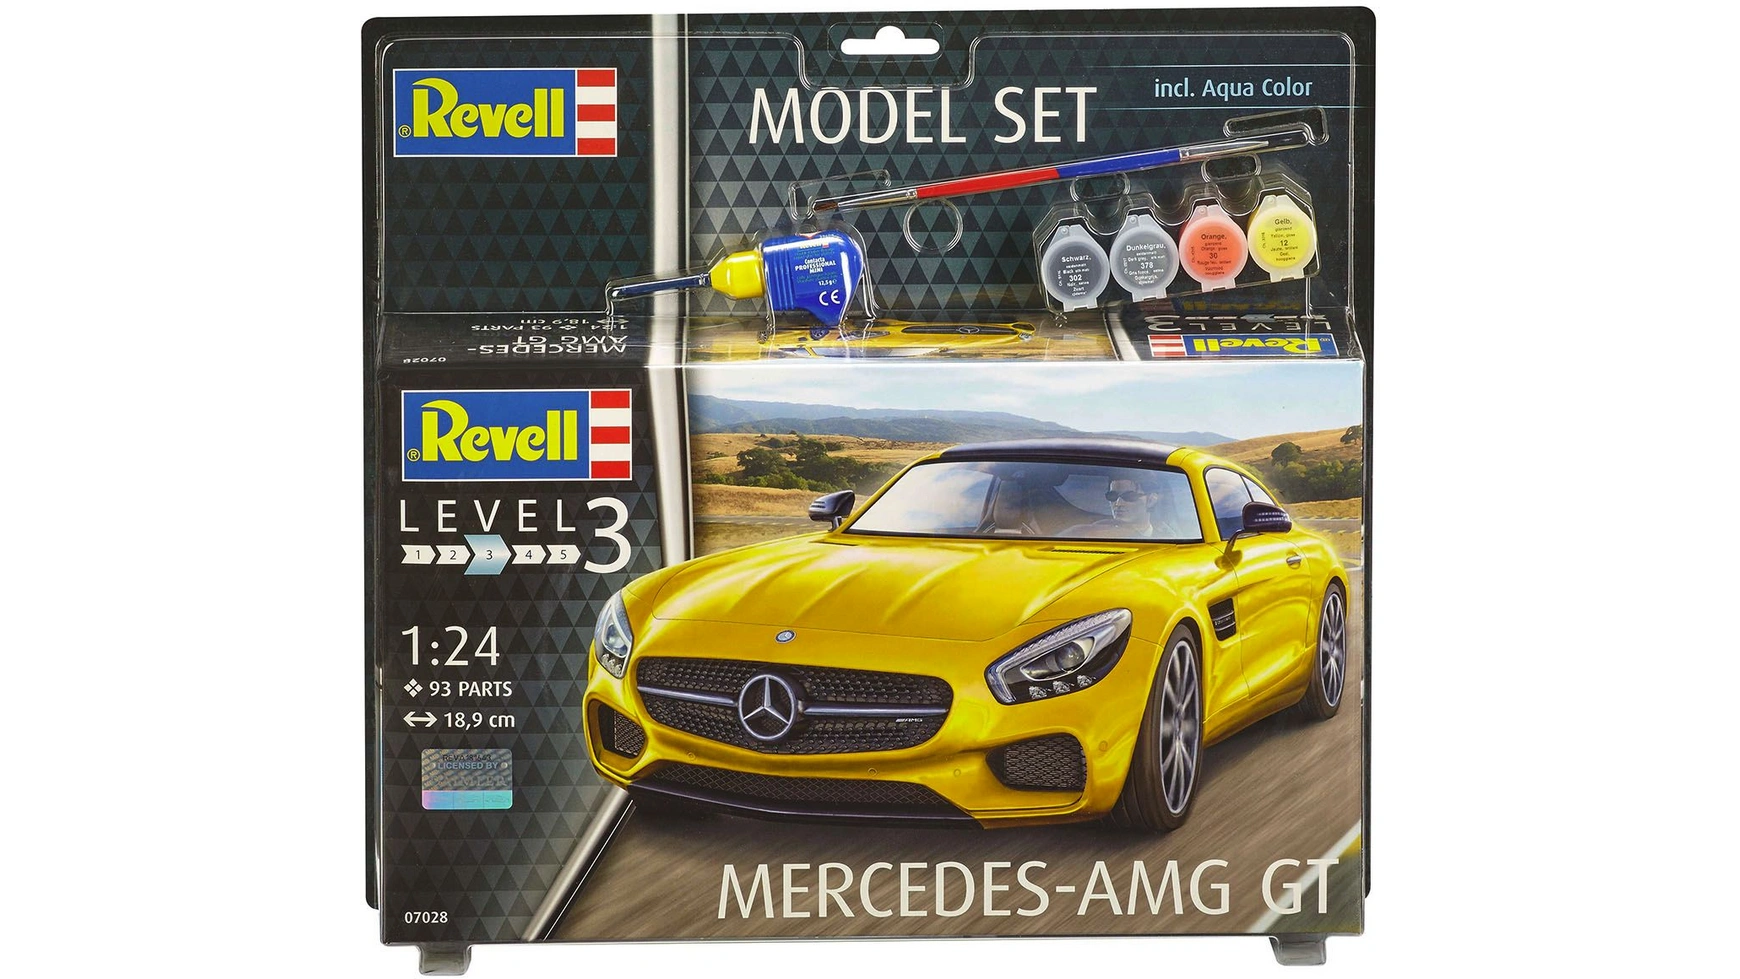 Revell Набор моделей Mercedes-AMG GT a4638202210 4638202210 brand new power window switch suit for mercedes benz g500 g55 amg g550 g63 amg front lh